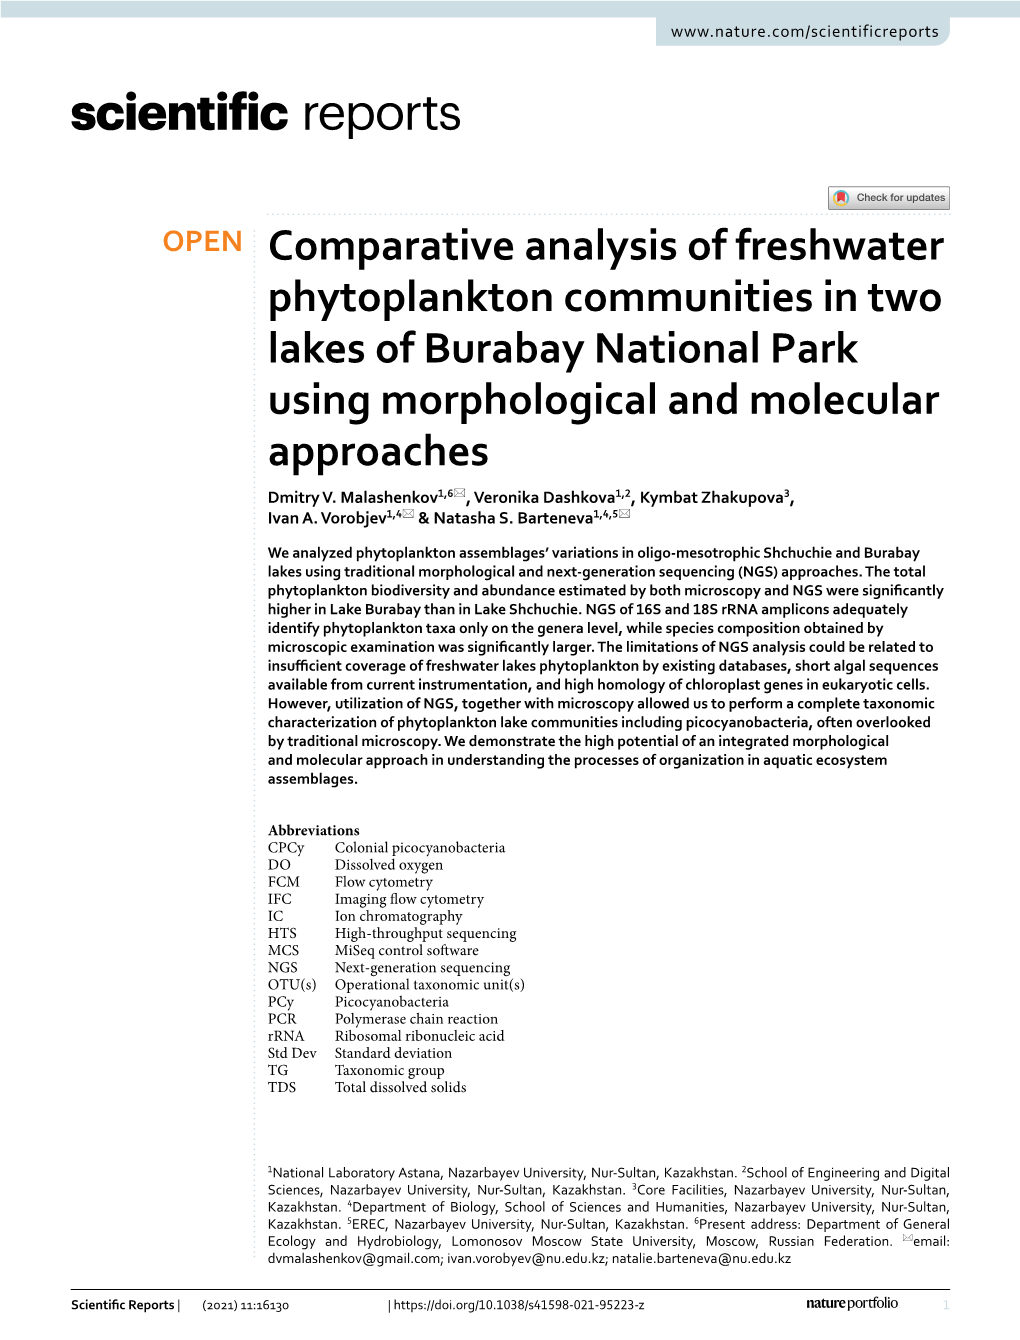 Comparative Analysis of Freshwater Phytoplankton Communities in Two Lakes of Burabay National Park Using Morphological and Molecular Approaches Dmitry V